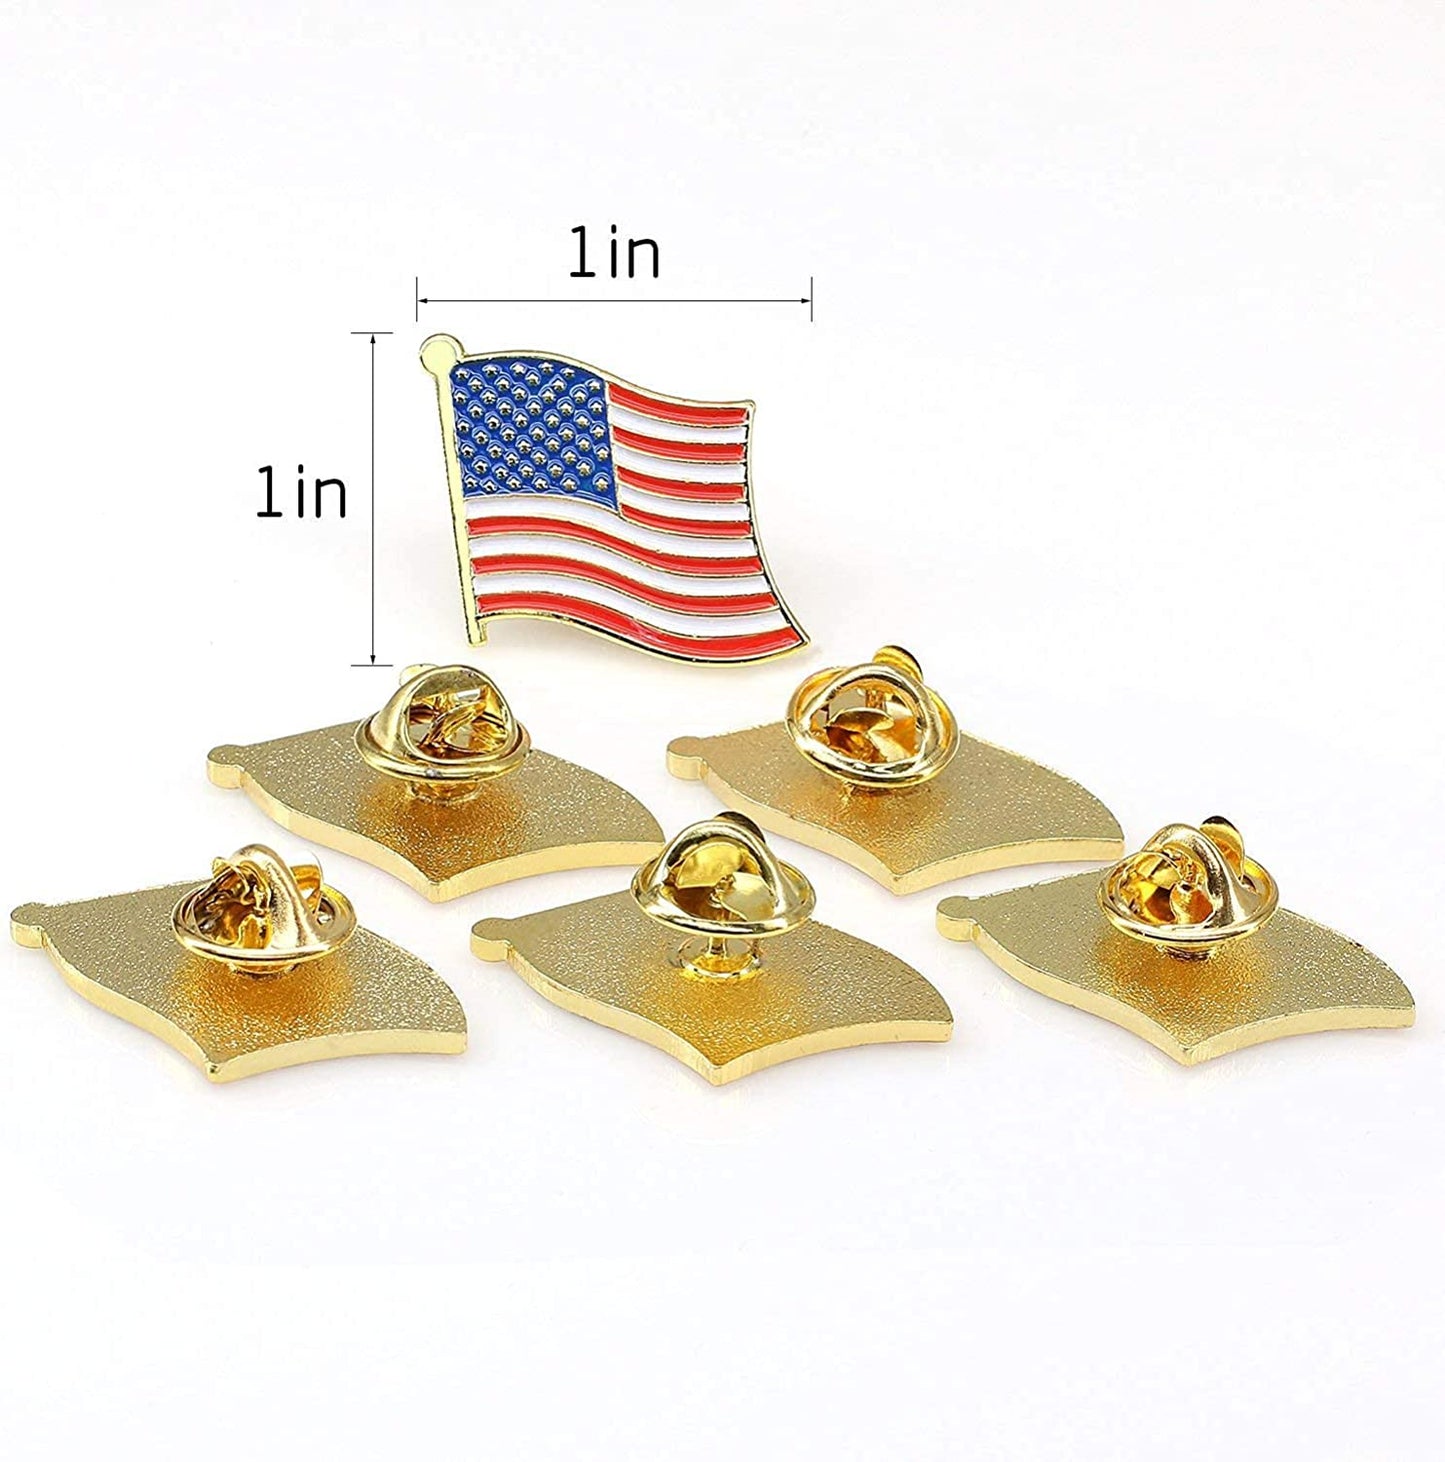 Exquisite American Flag Lapel Pin -The Stars and Stripes -Solid Metal Flag Lapel Pin-Gold Tone (6 Pins with Gift Box)